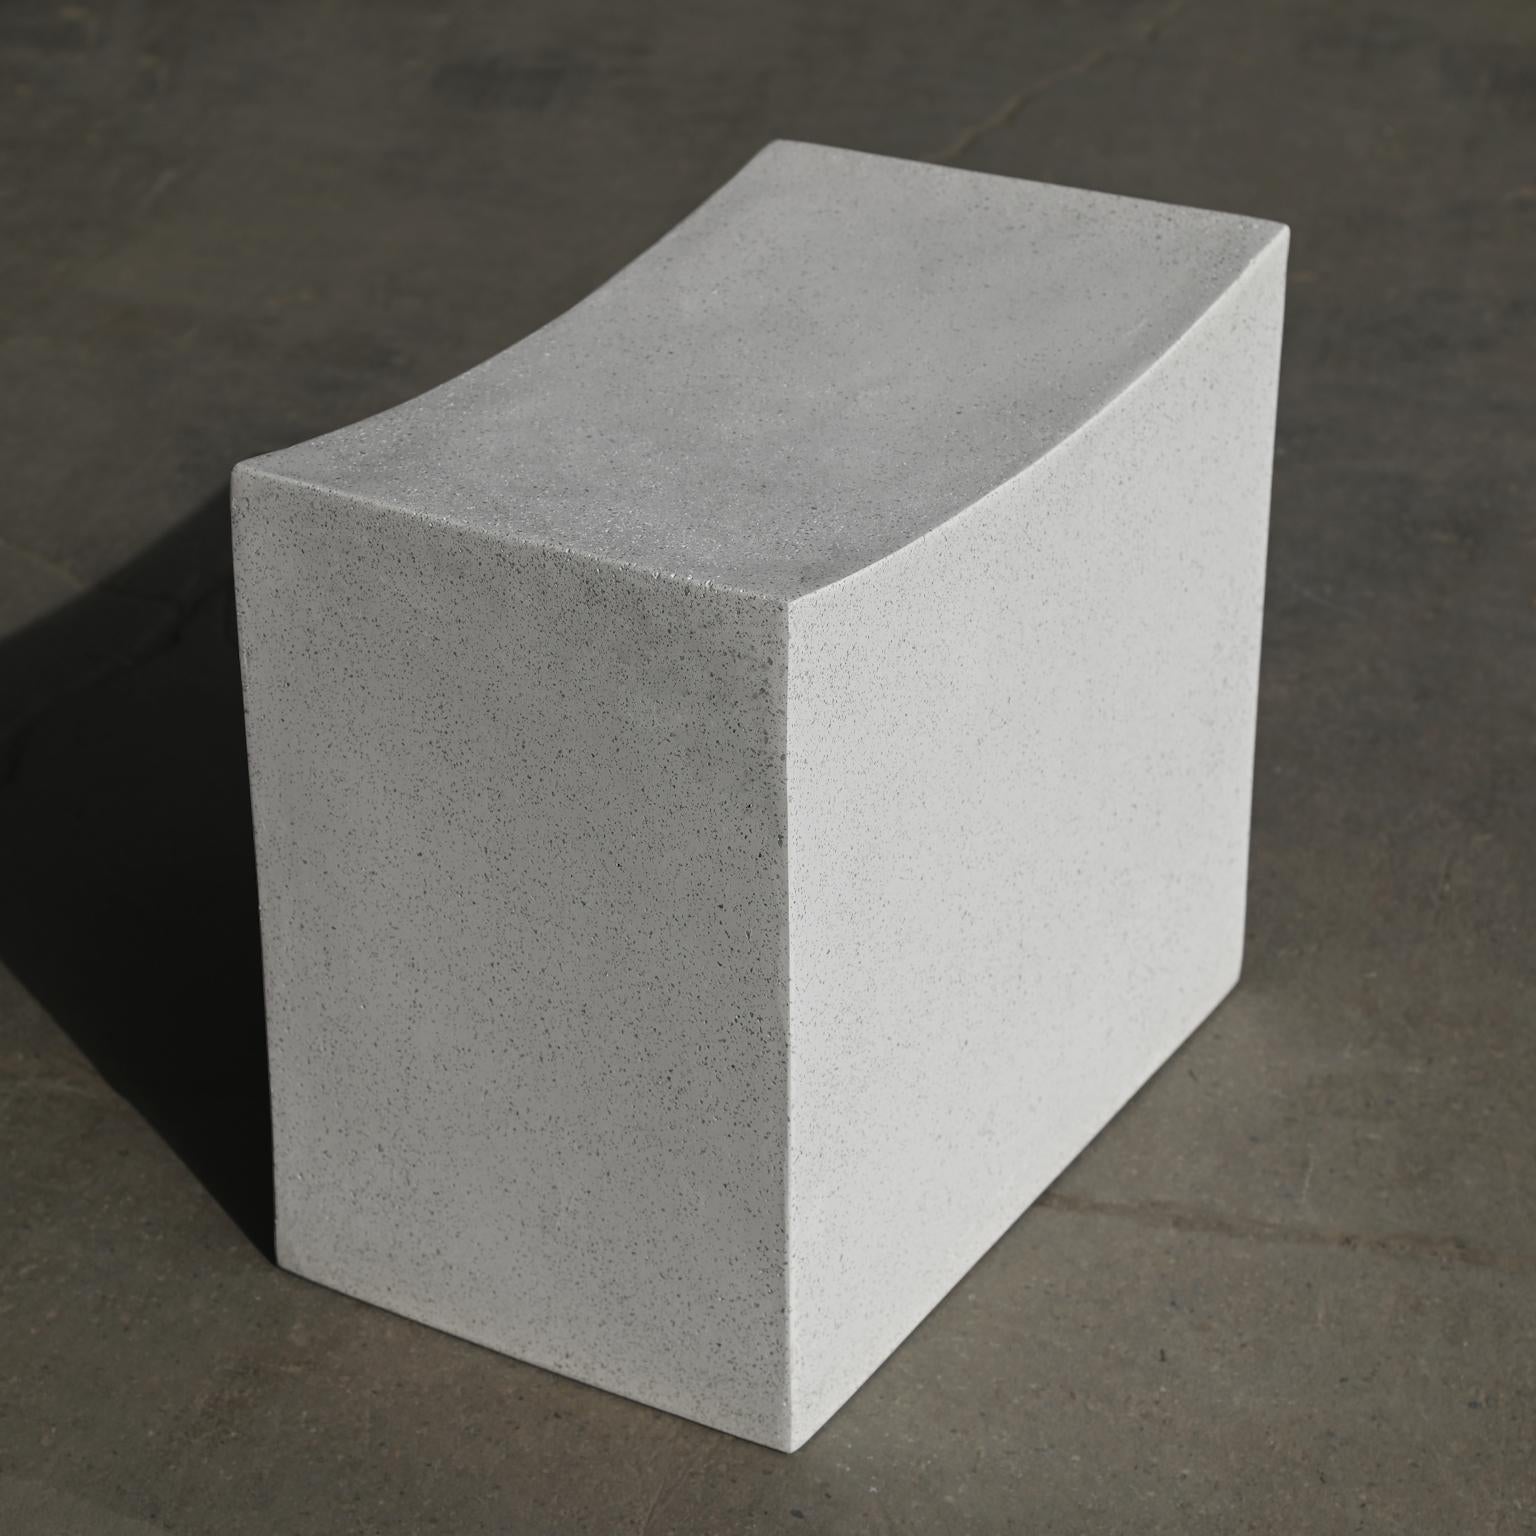 Brutalist sensibility with a soothing, gentle welcome. This supportive block was carved into a gentle arc, stone traversing its crown. Hard-lined geometry buckles and becomes organic, a reminder of the transformative power of the human